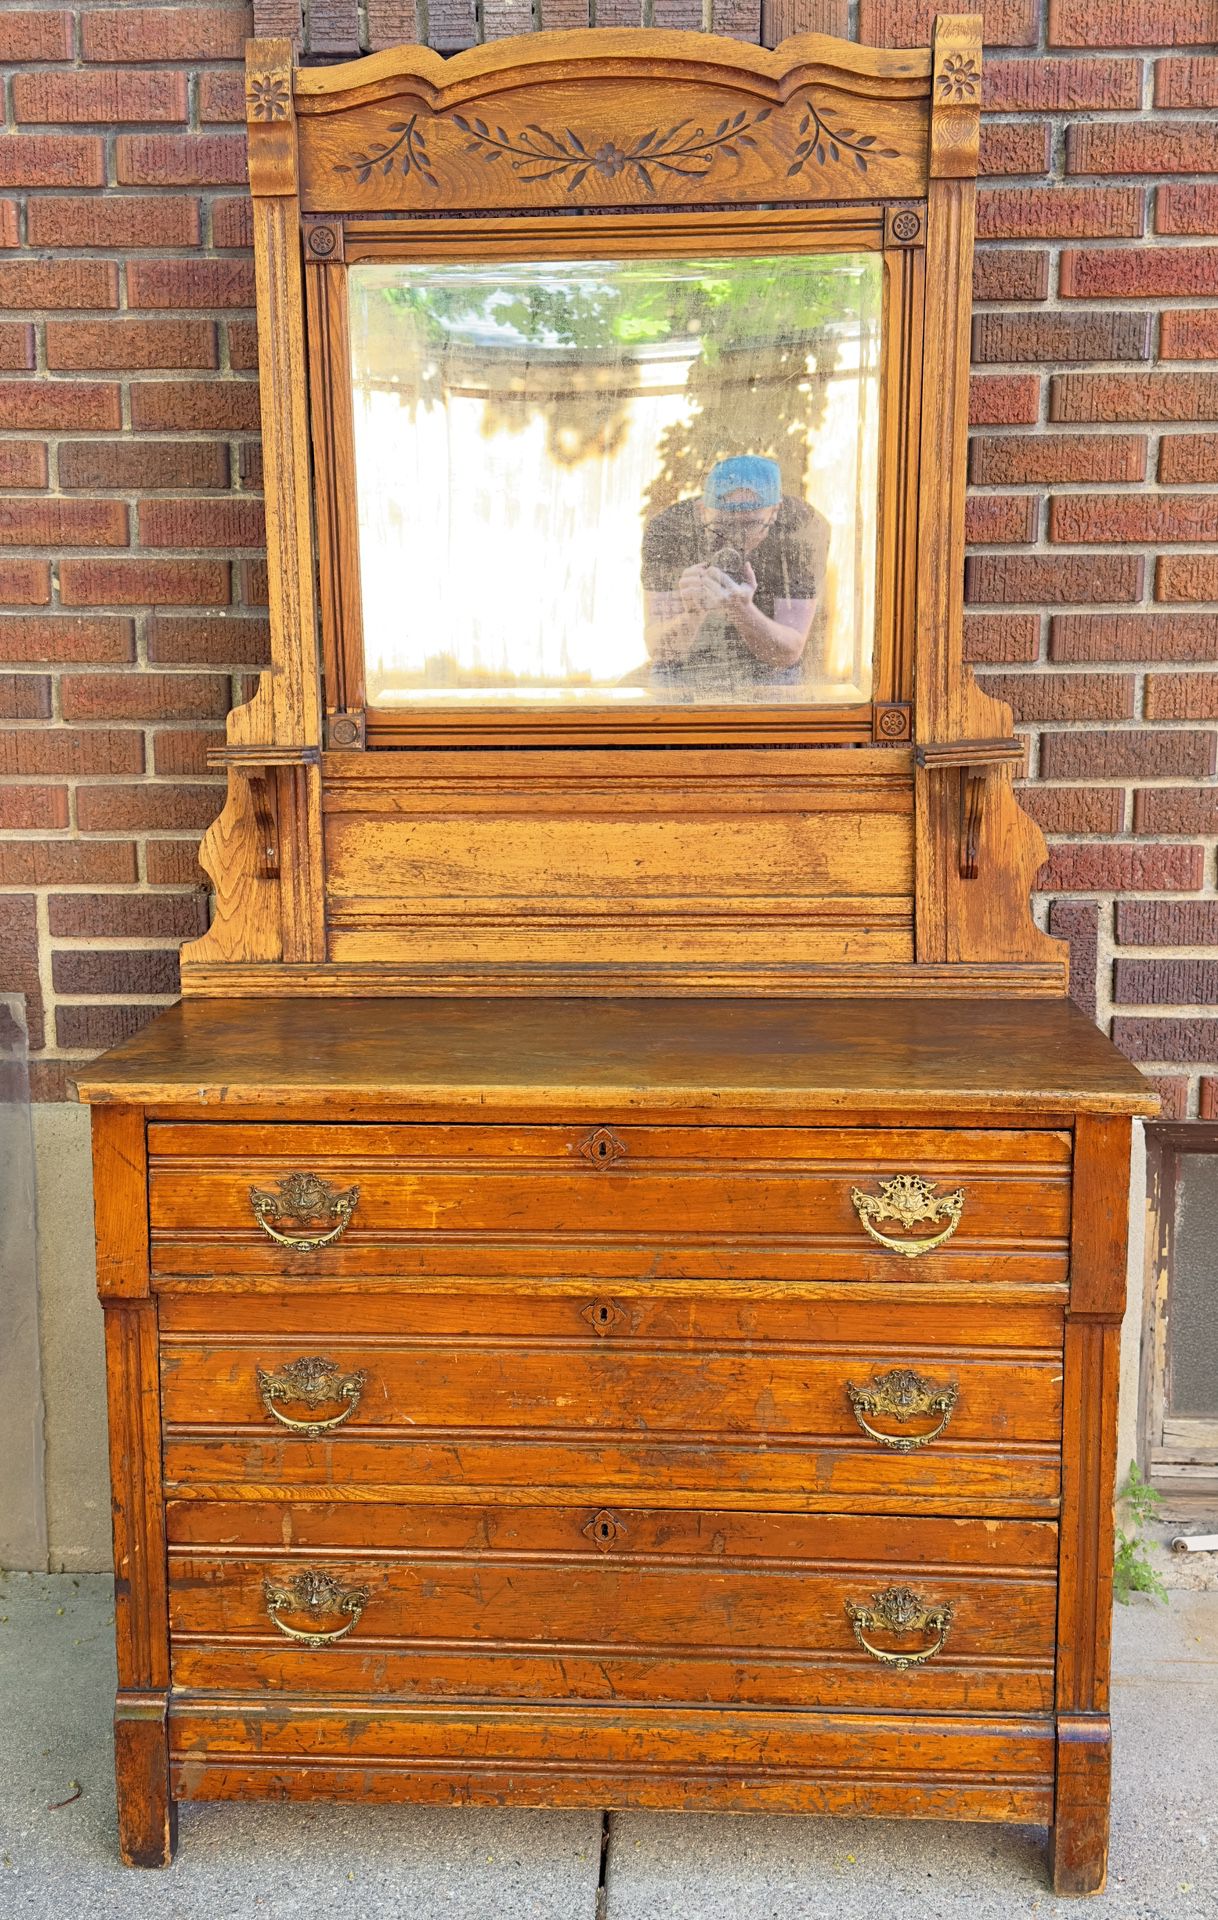 Antique 3 Drawer Dresser With Mirror (Early 1900s)